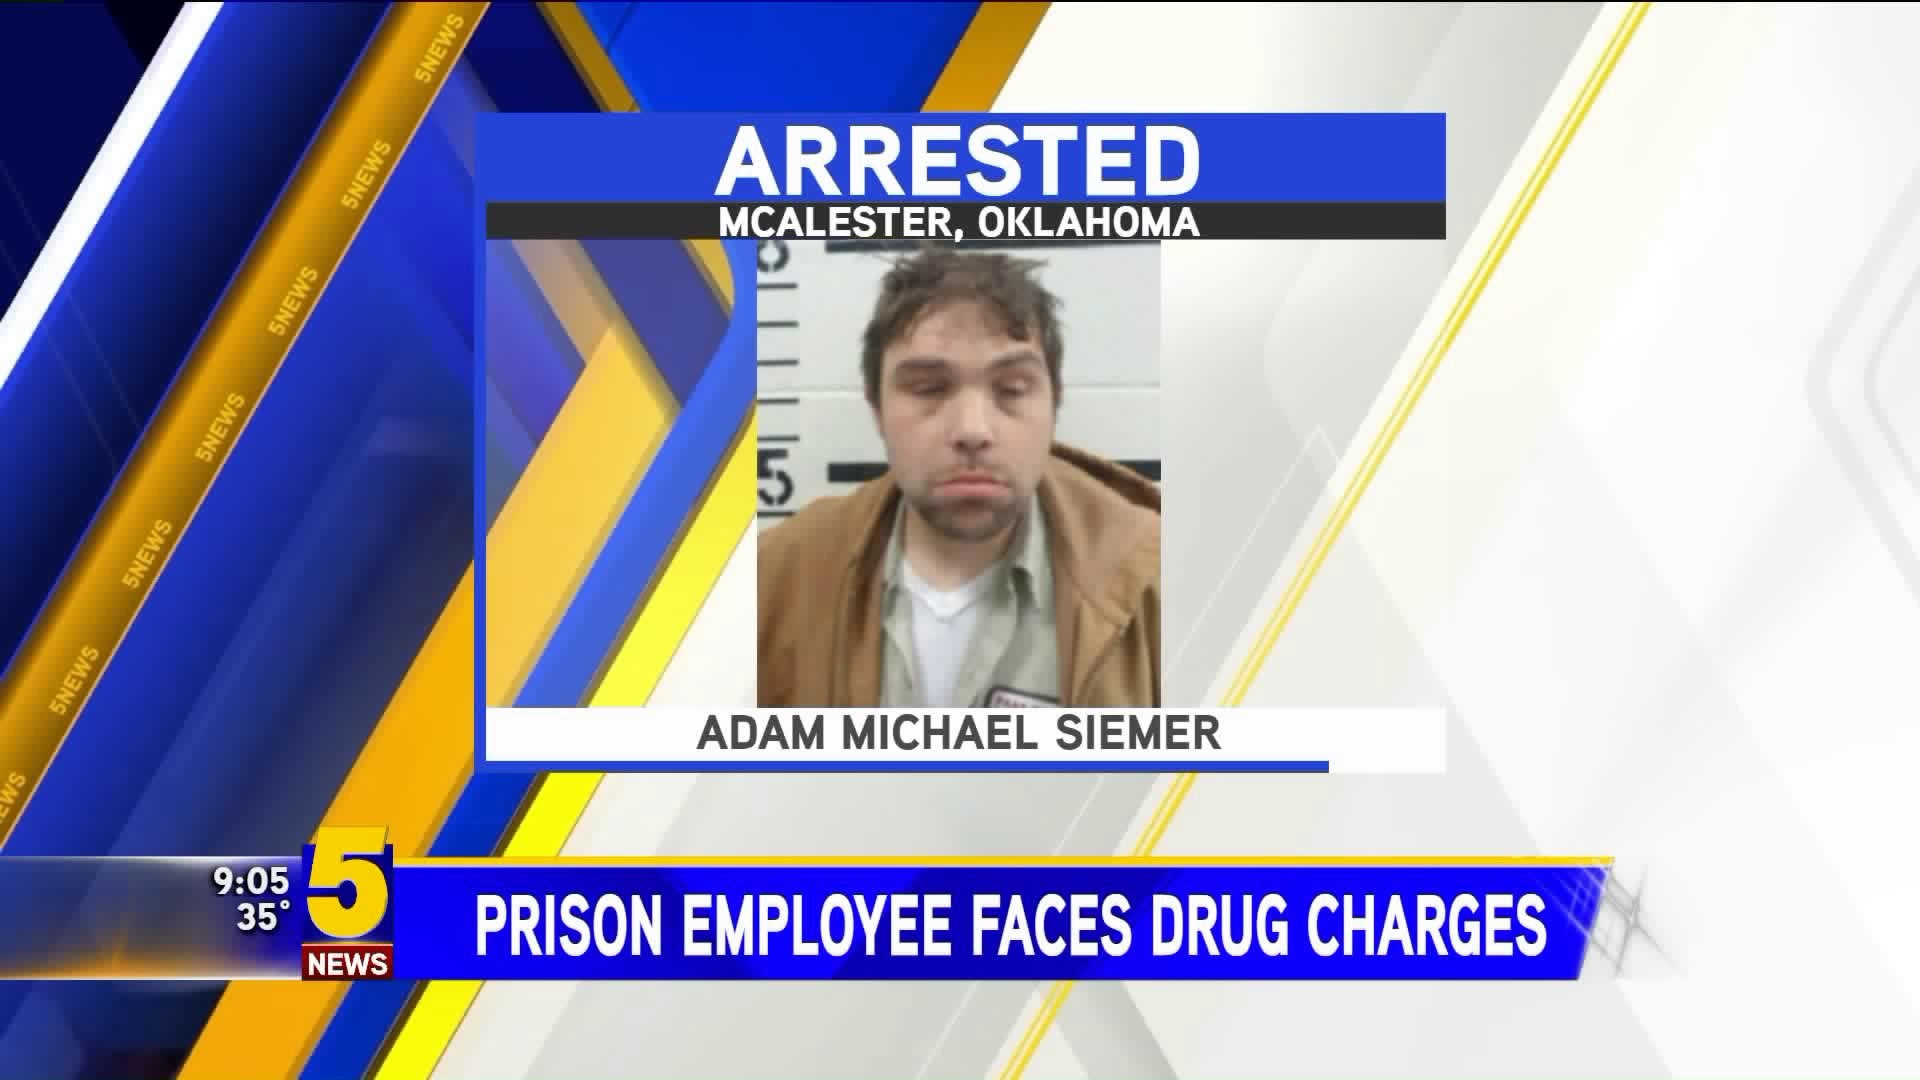 Prison Employee Faces Drug Charges